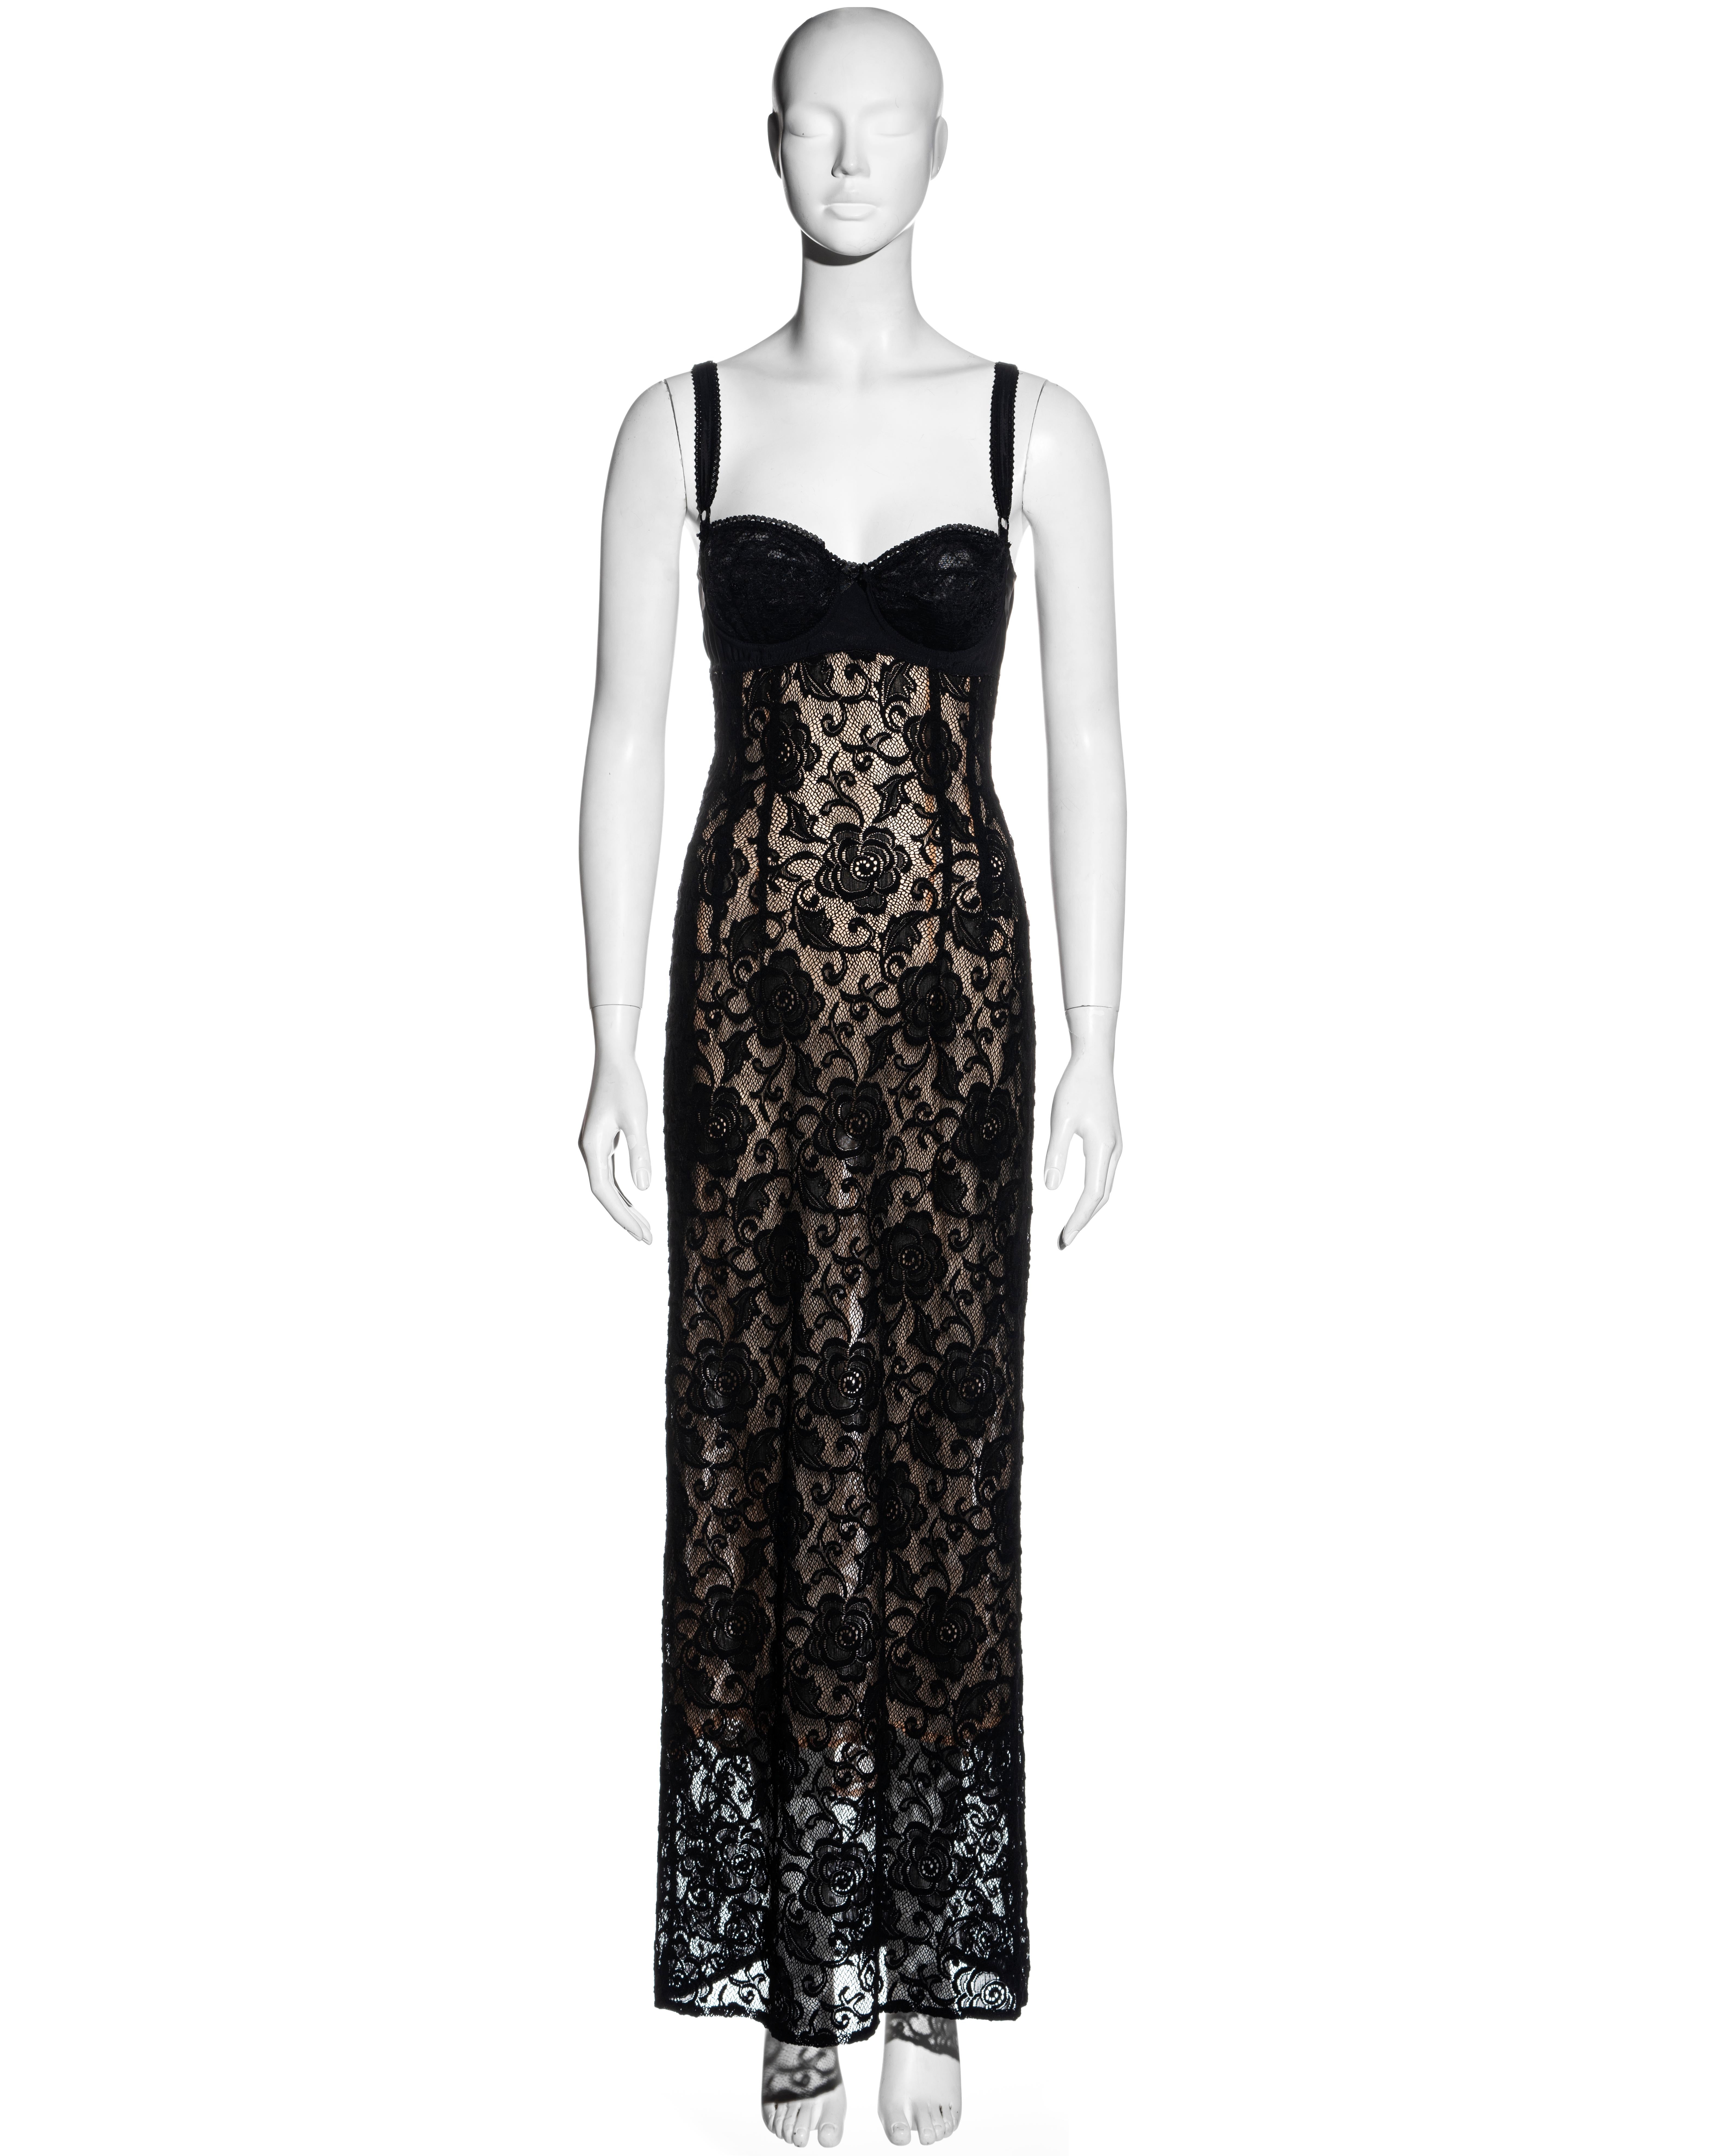 ▪ Dolce & Gabbana black lace maxi dress 
▪ Sold by One of a Kind Archive
▪ Spring-Summer 1997
▪ Attached bra with spandex band and adjustable shoulder straps
▪ Nude silk chiffon lining 
▪ Cut-out back  
▪ Concealed zip fastening  
▪ IT 46 - FR 42 -